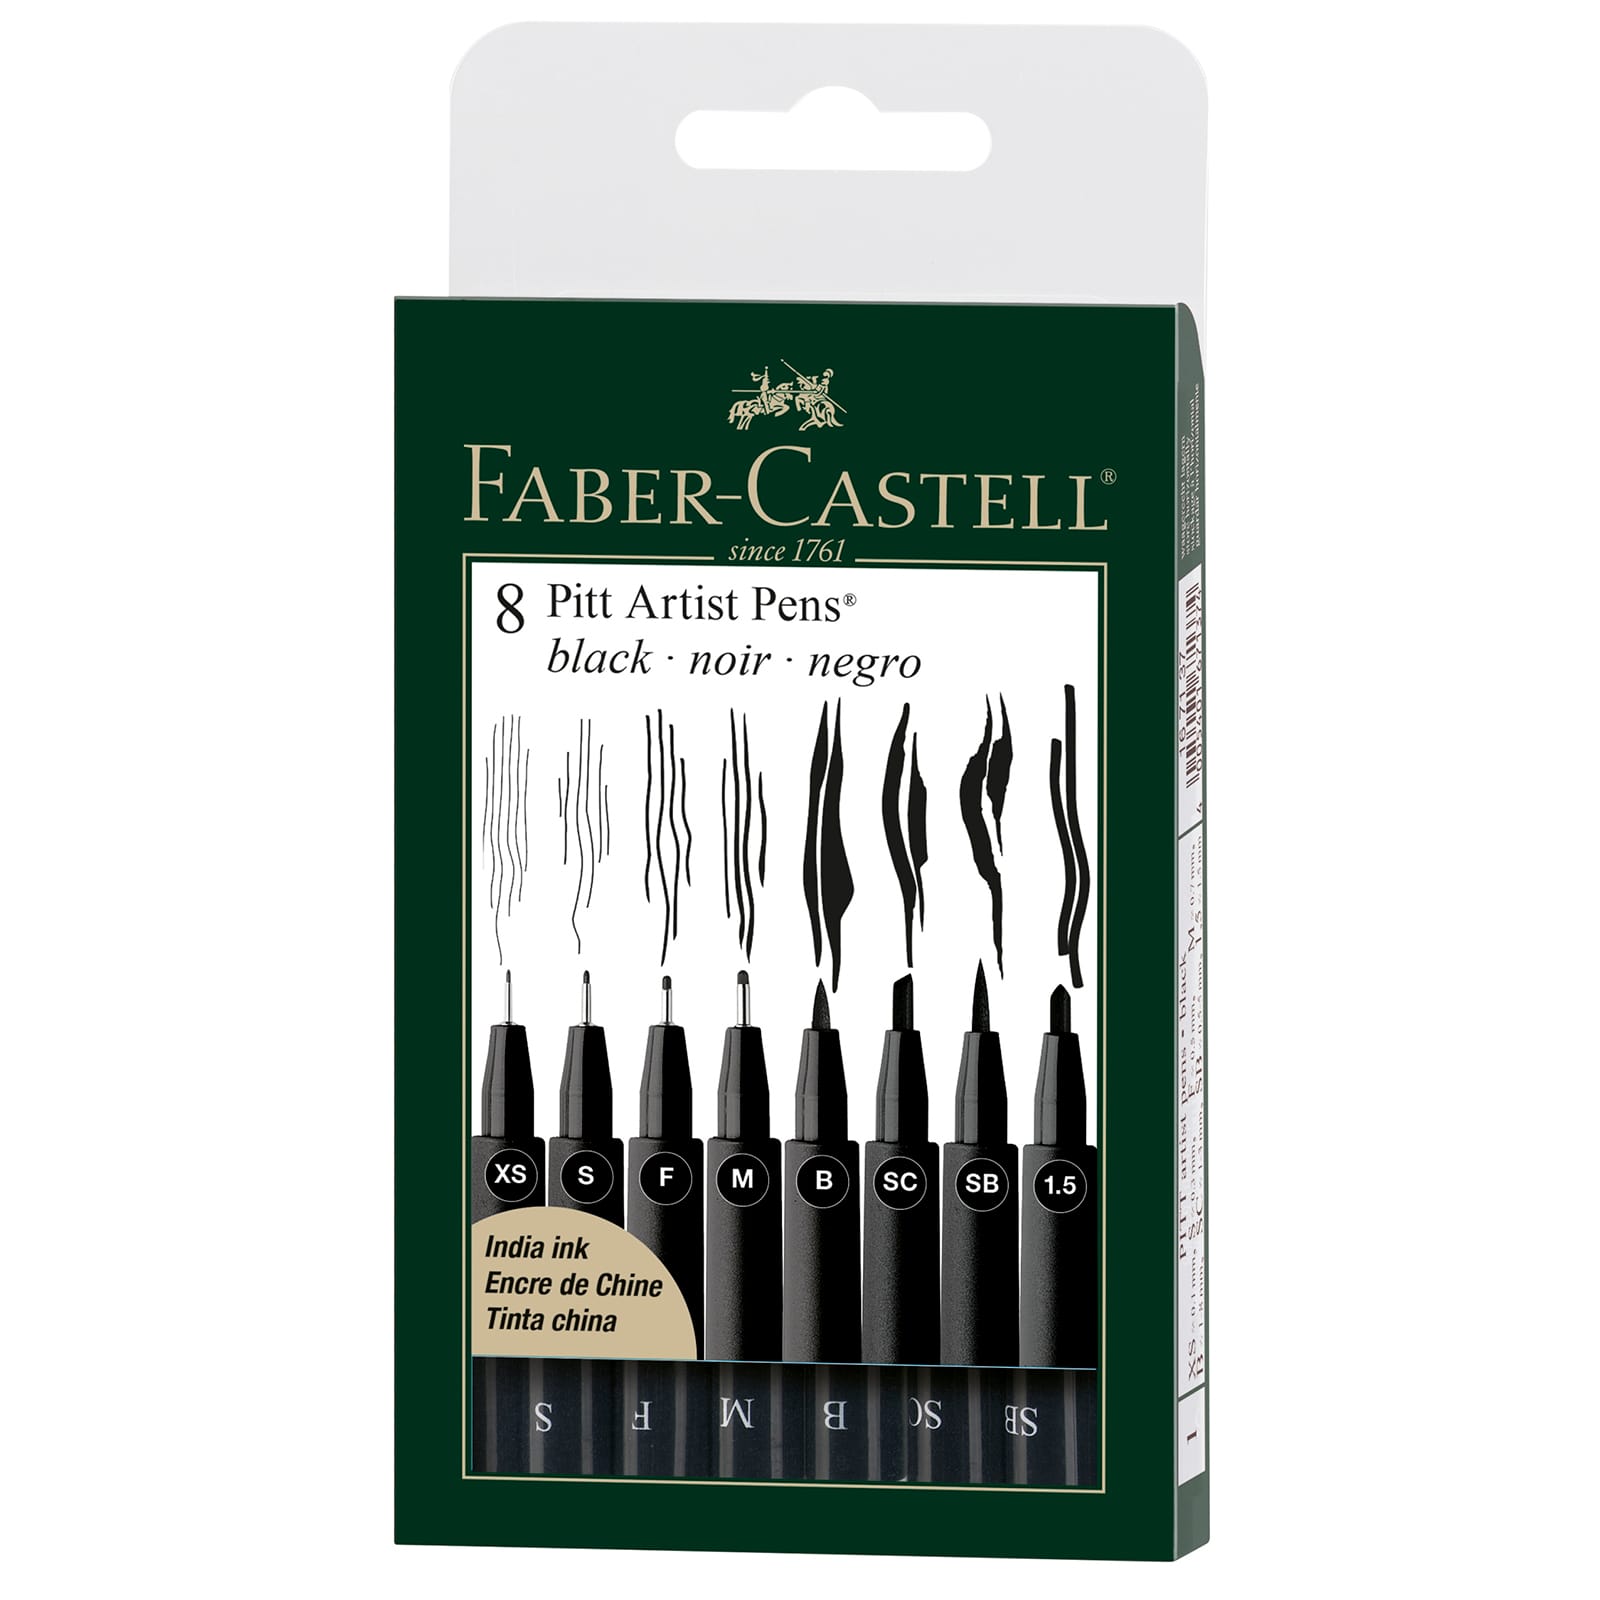 Faber Castell #8B Extra Dark Pencil - My Tools for Living℠ Retail